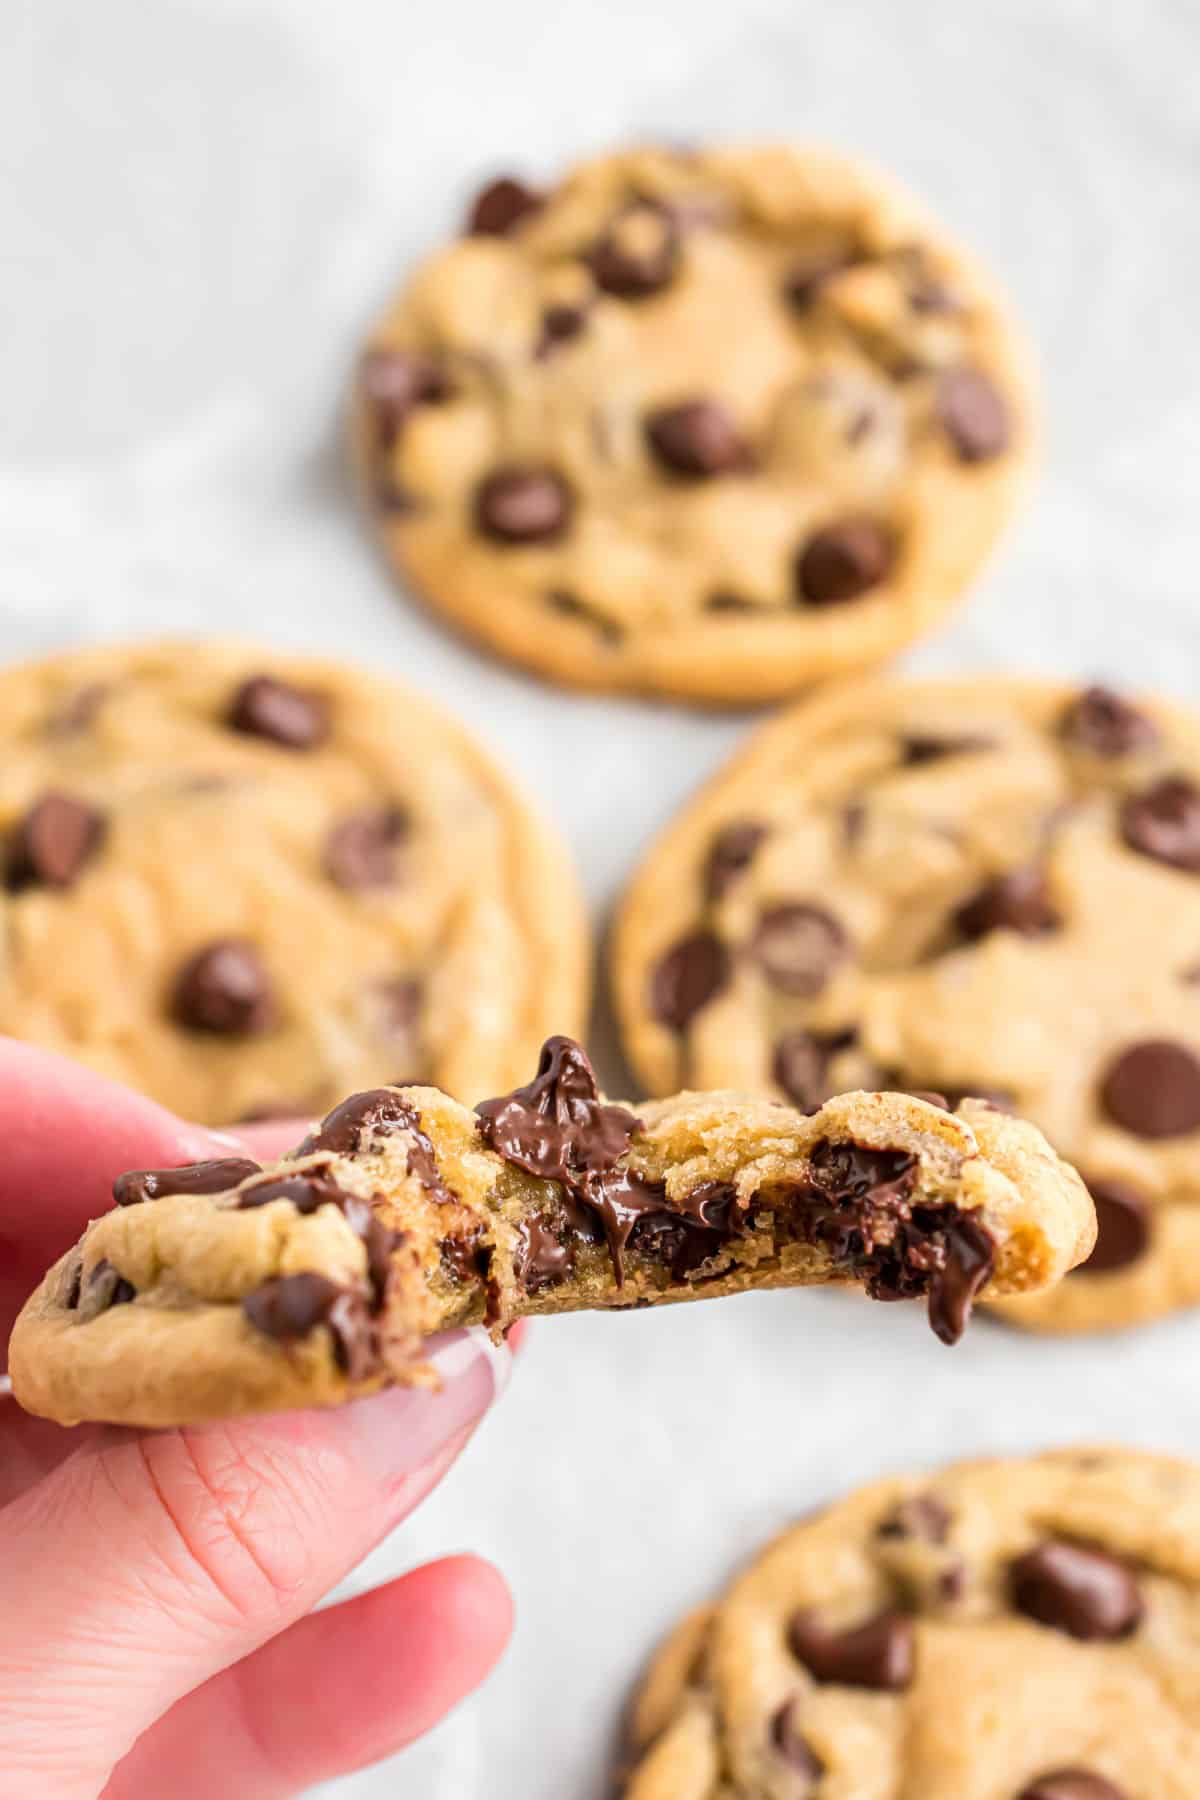 Chocolate chip cookies with a bite removed and melty chocolate.